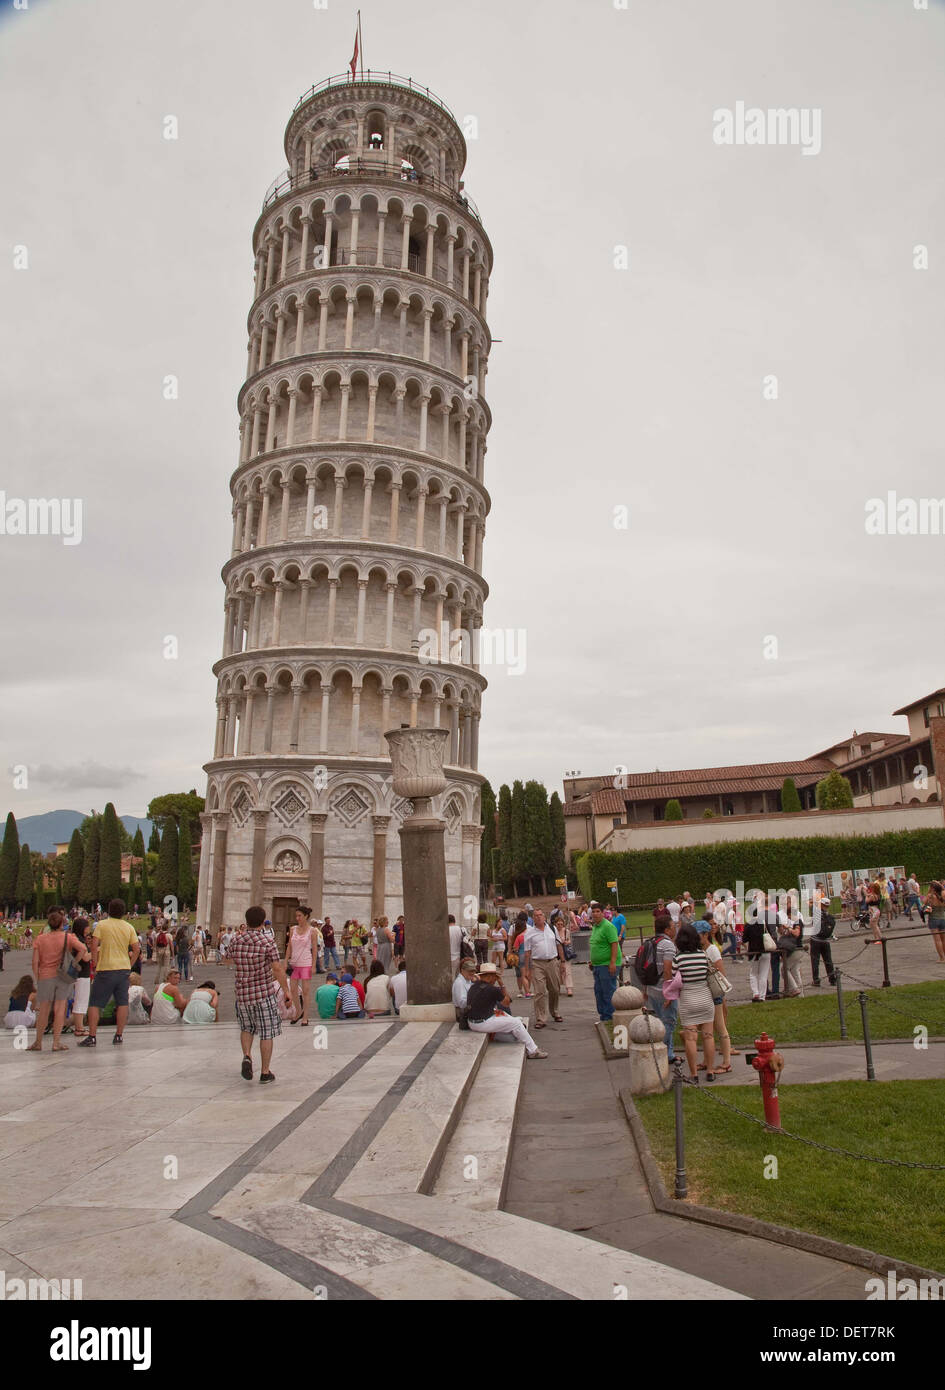 Leaning tower of Pisa, Italy, Italian tourist attraction. Stock Photo